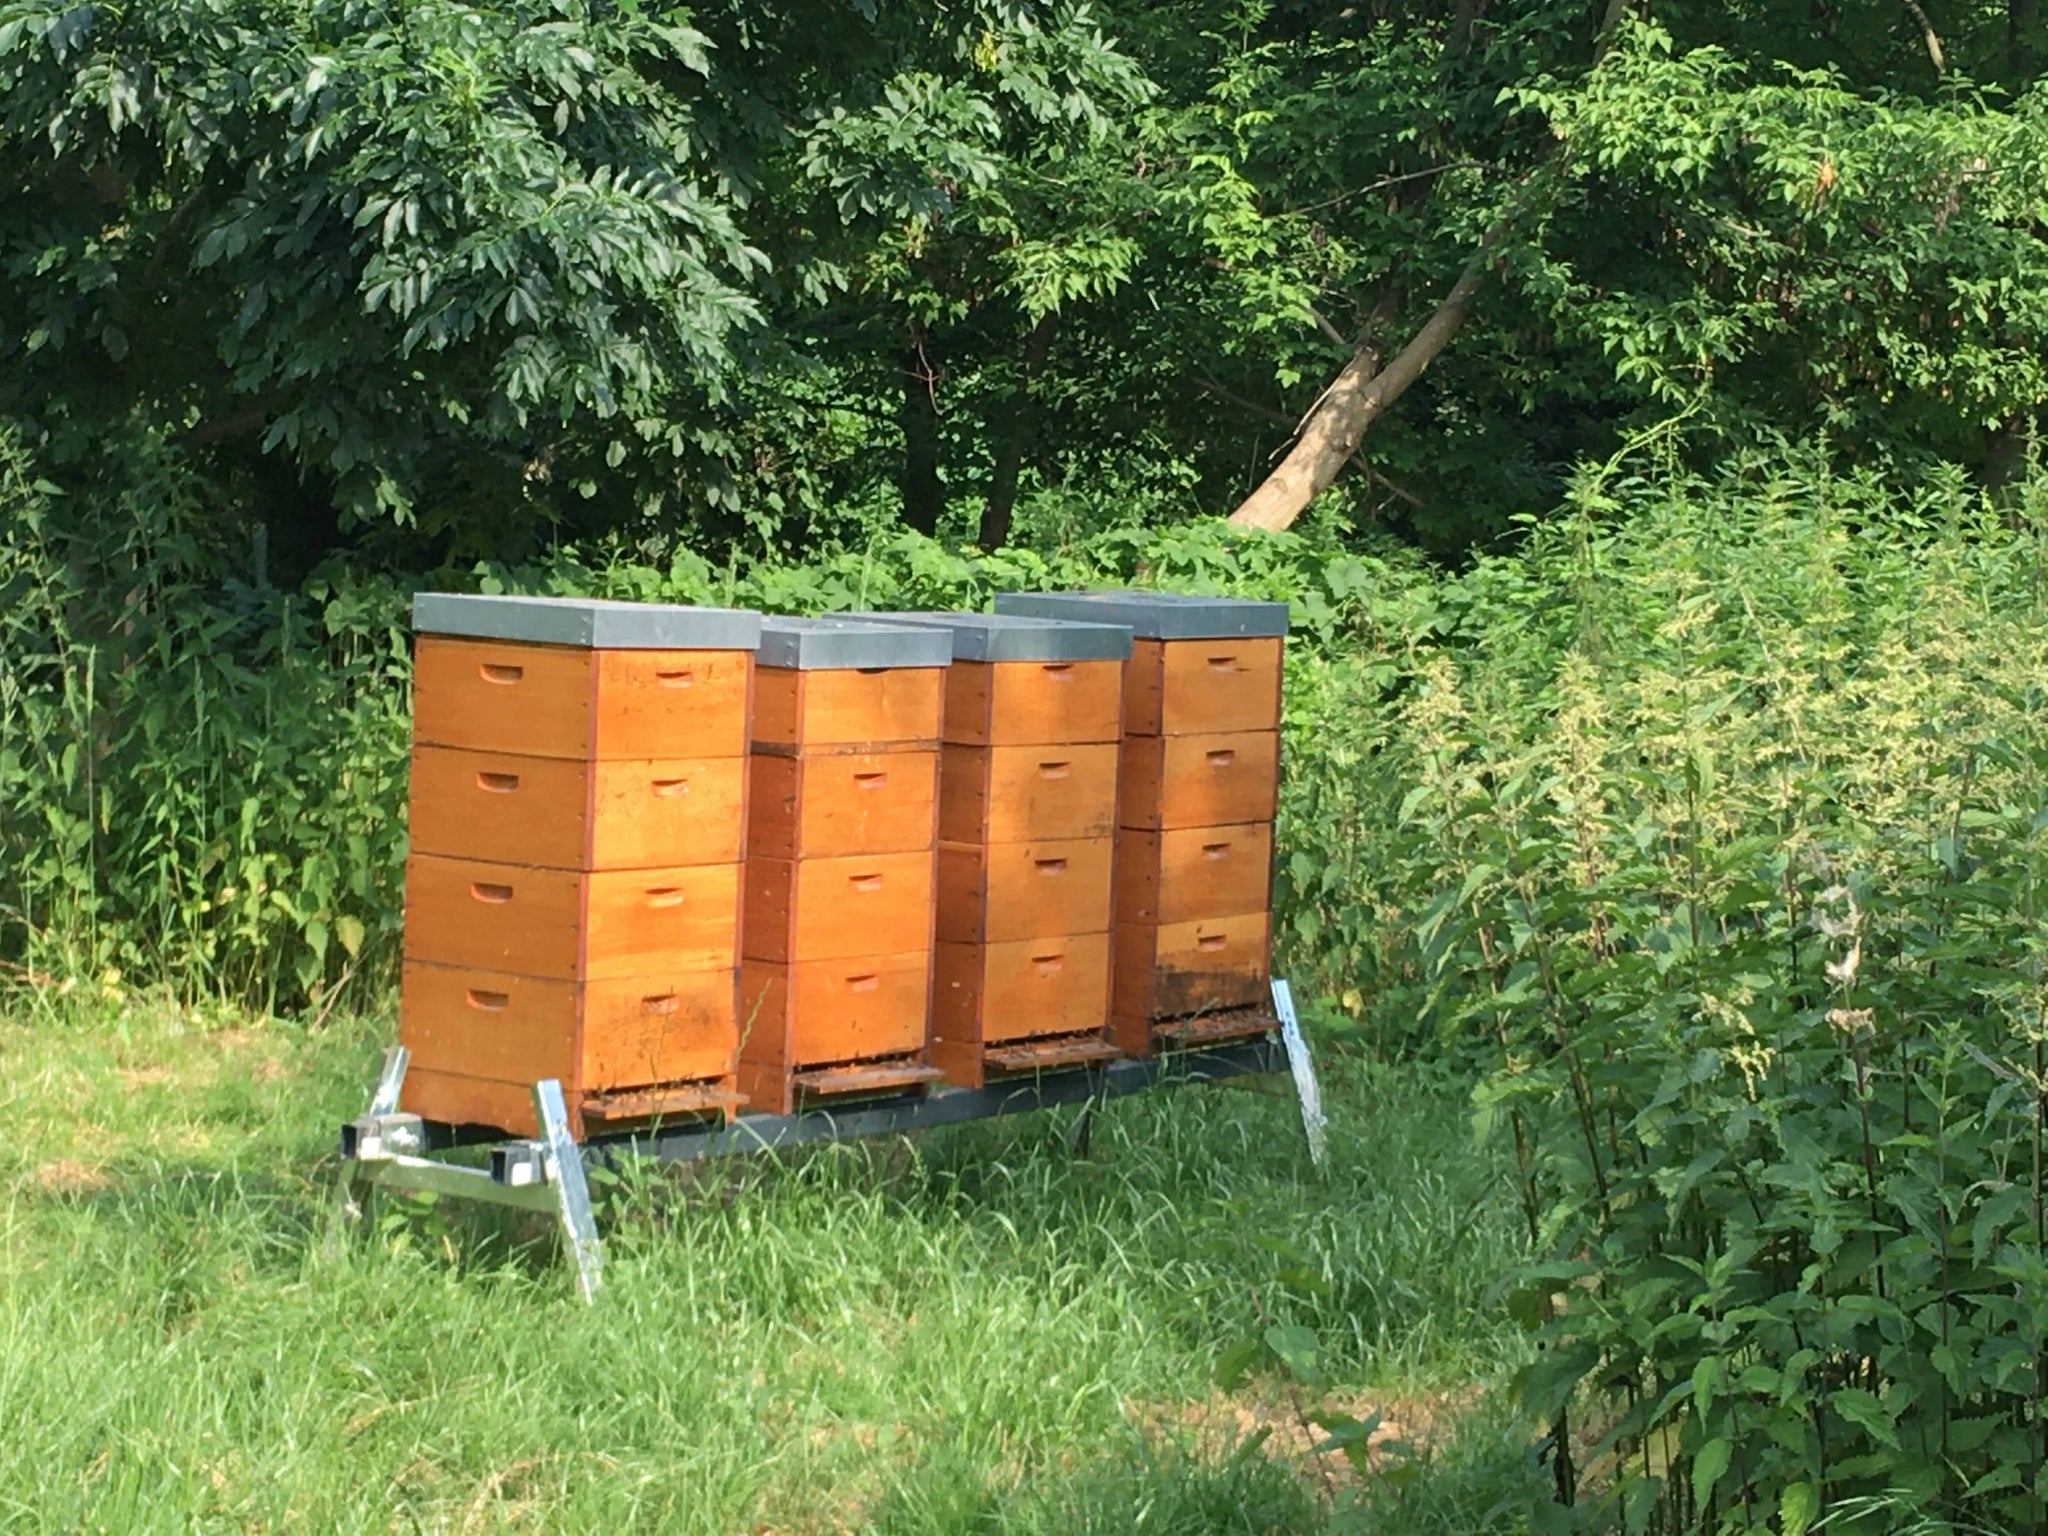 A visit to the apiary.